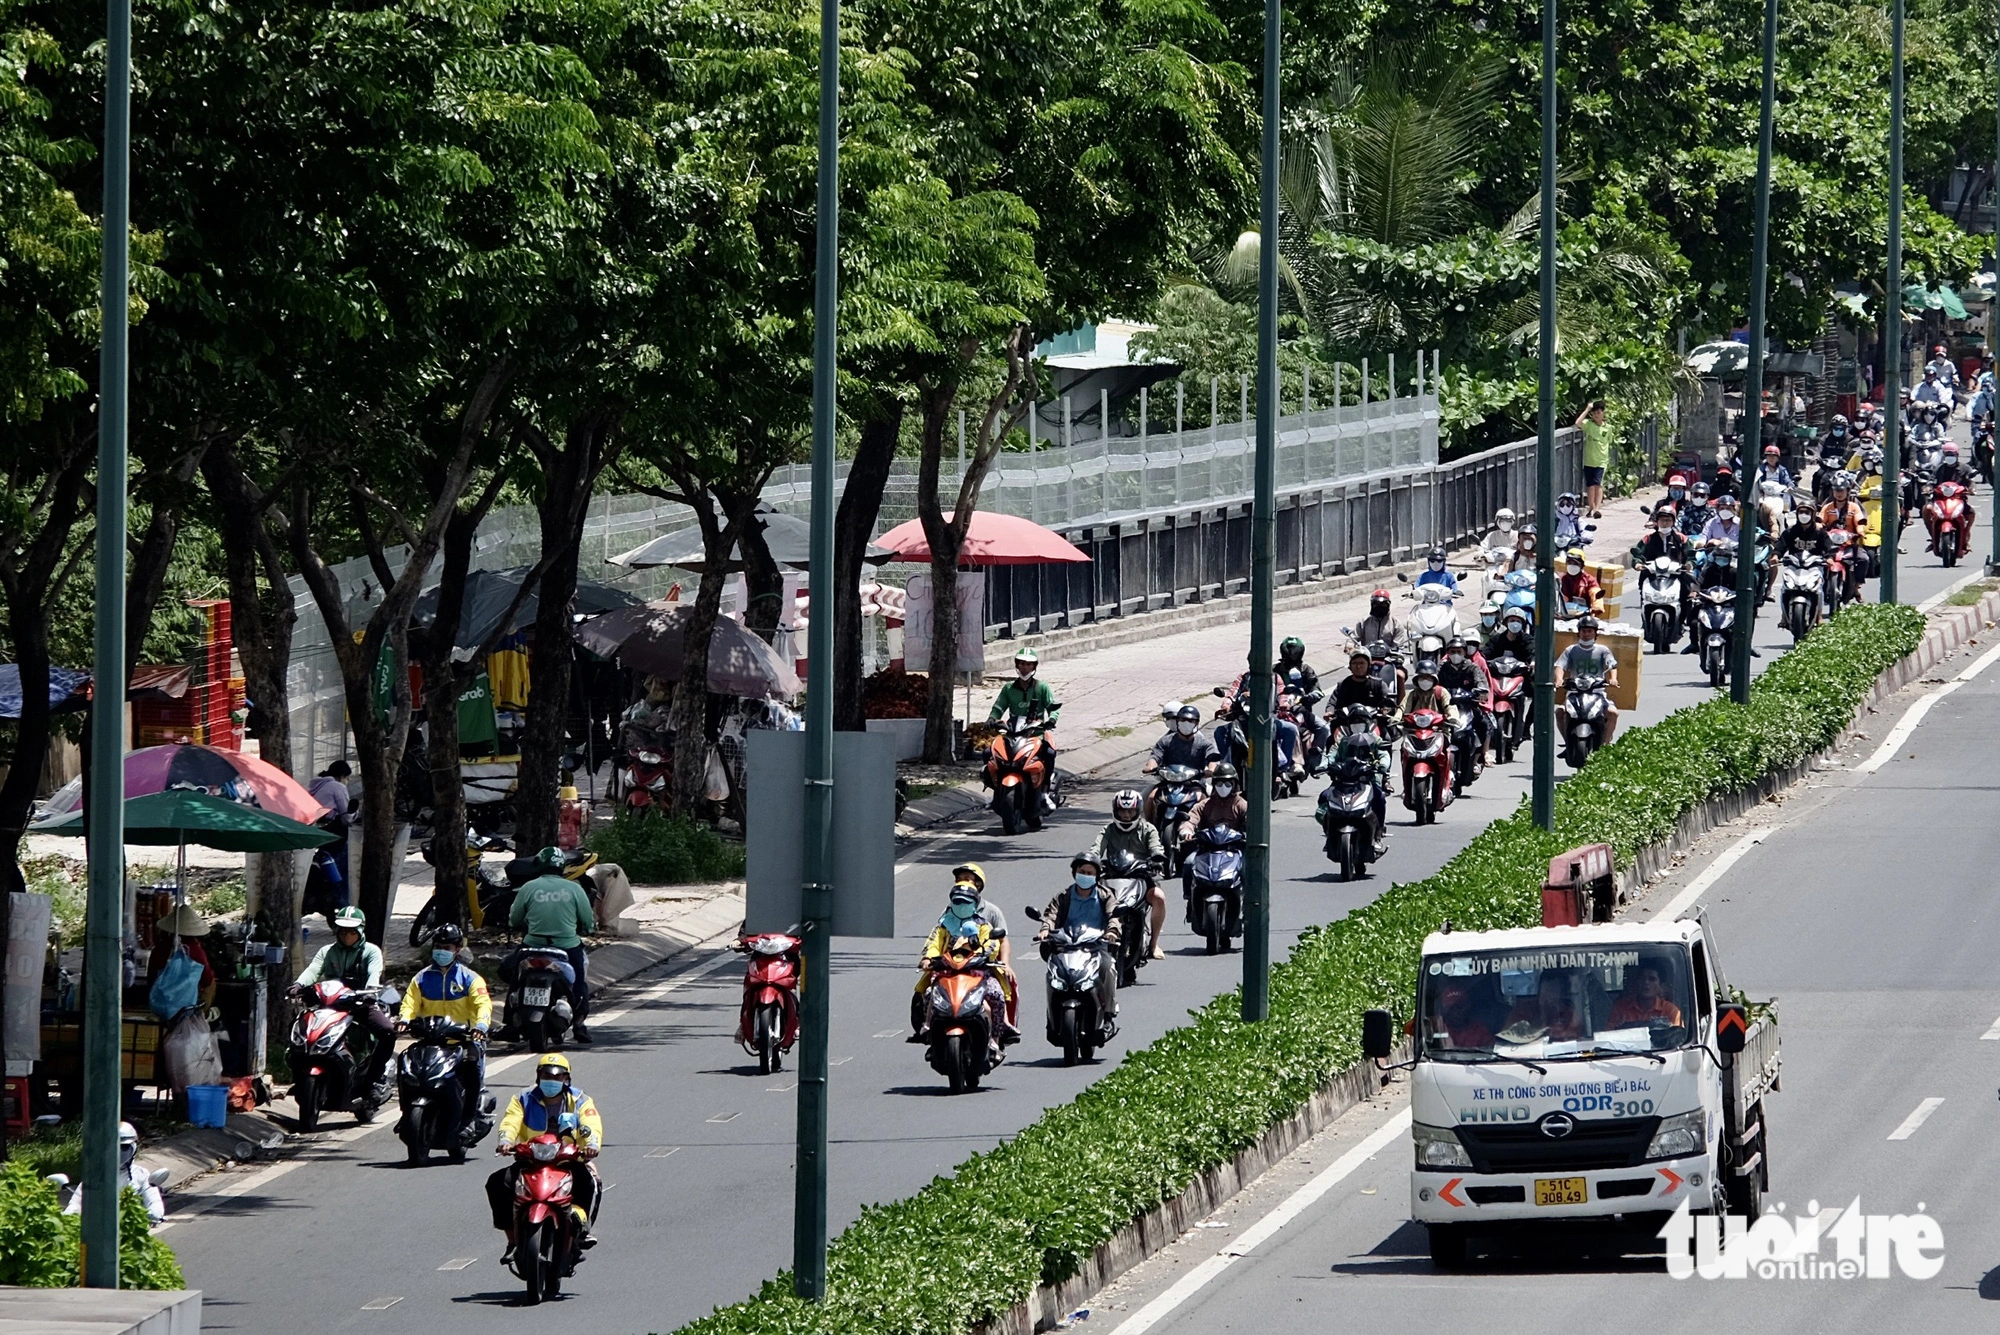 Besides the Rach Chiec, Binh Loi, and Rach Lang bridges, municipal authorities will install barriers under other bridges in the near future, including the Saigon Bridge and those along Vo Van Kiet Avenue. Photo: Phuong Nhi / Tuoi Tre